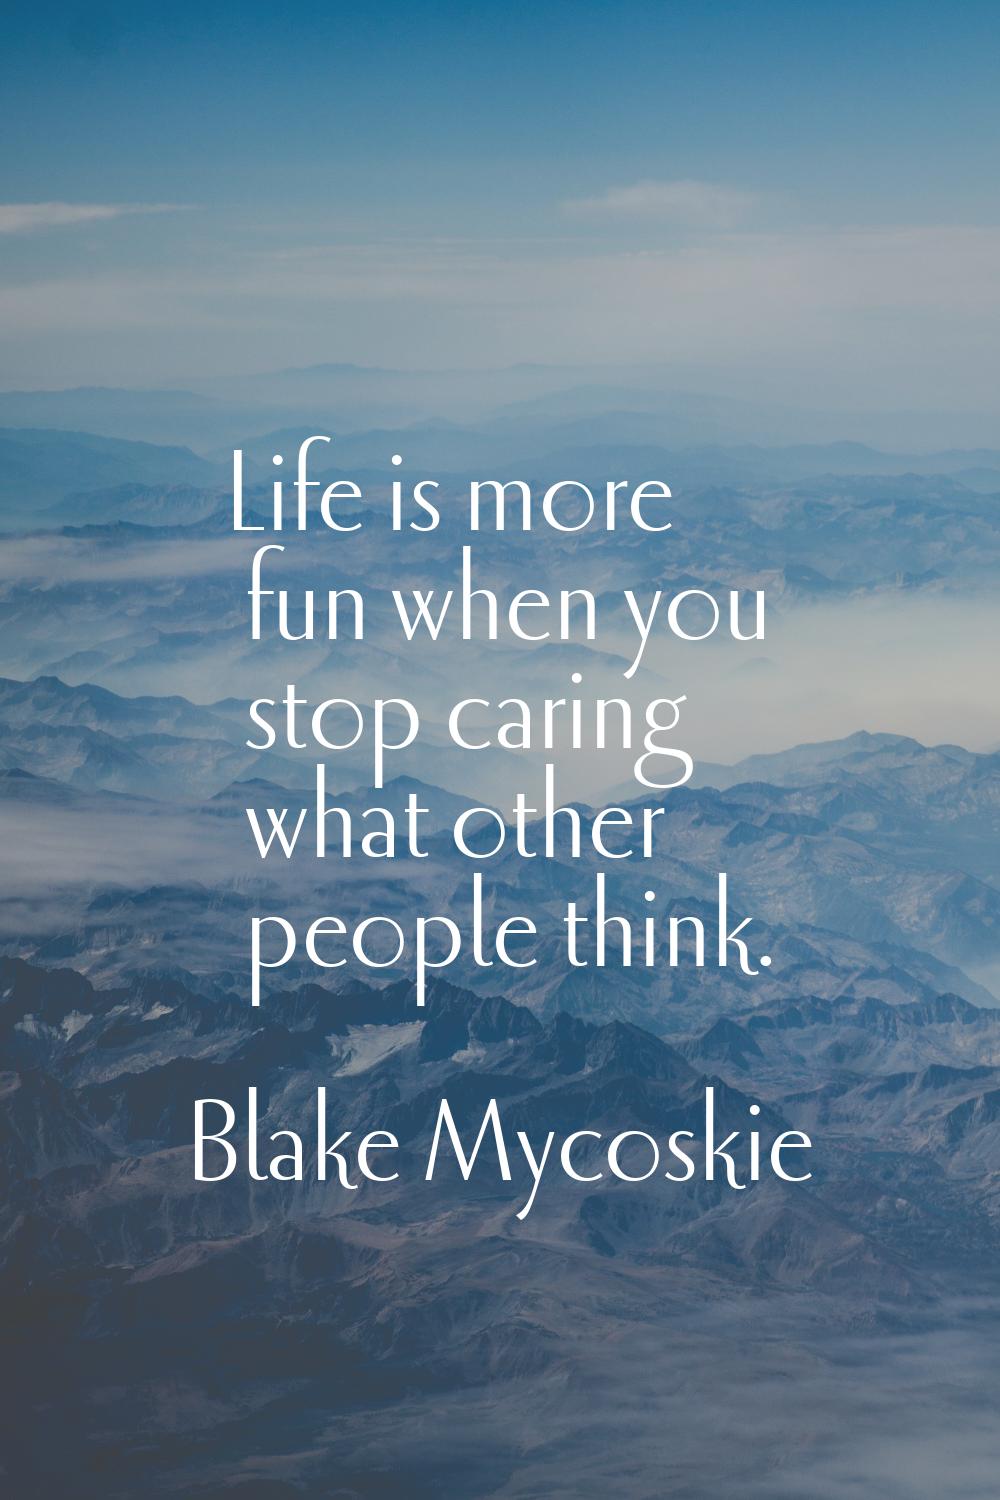 Life is more fun when you stop caring what other people think.